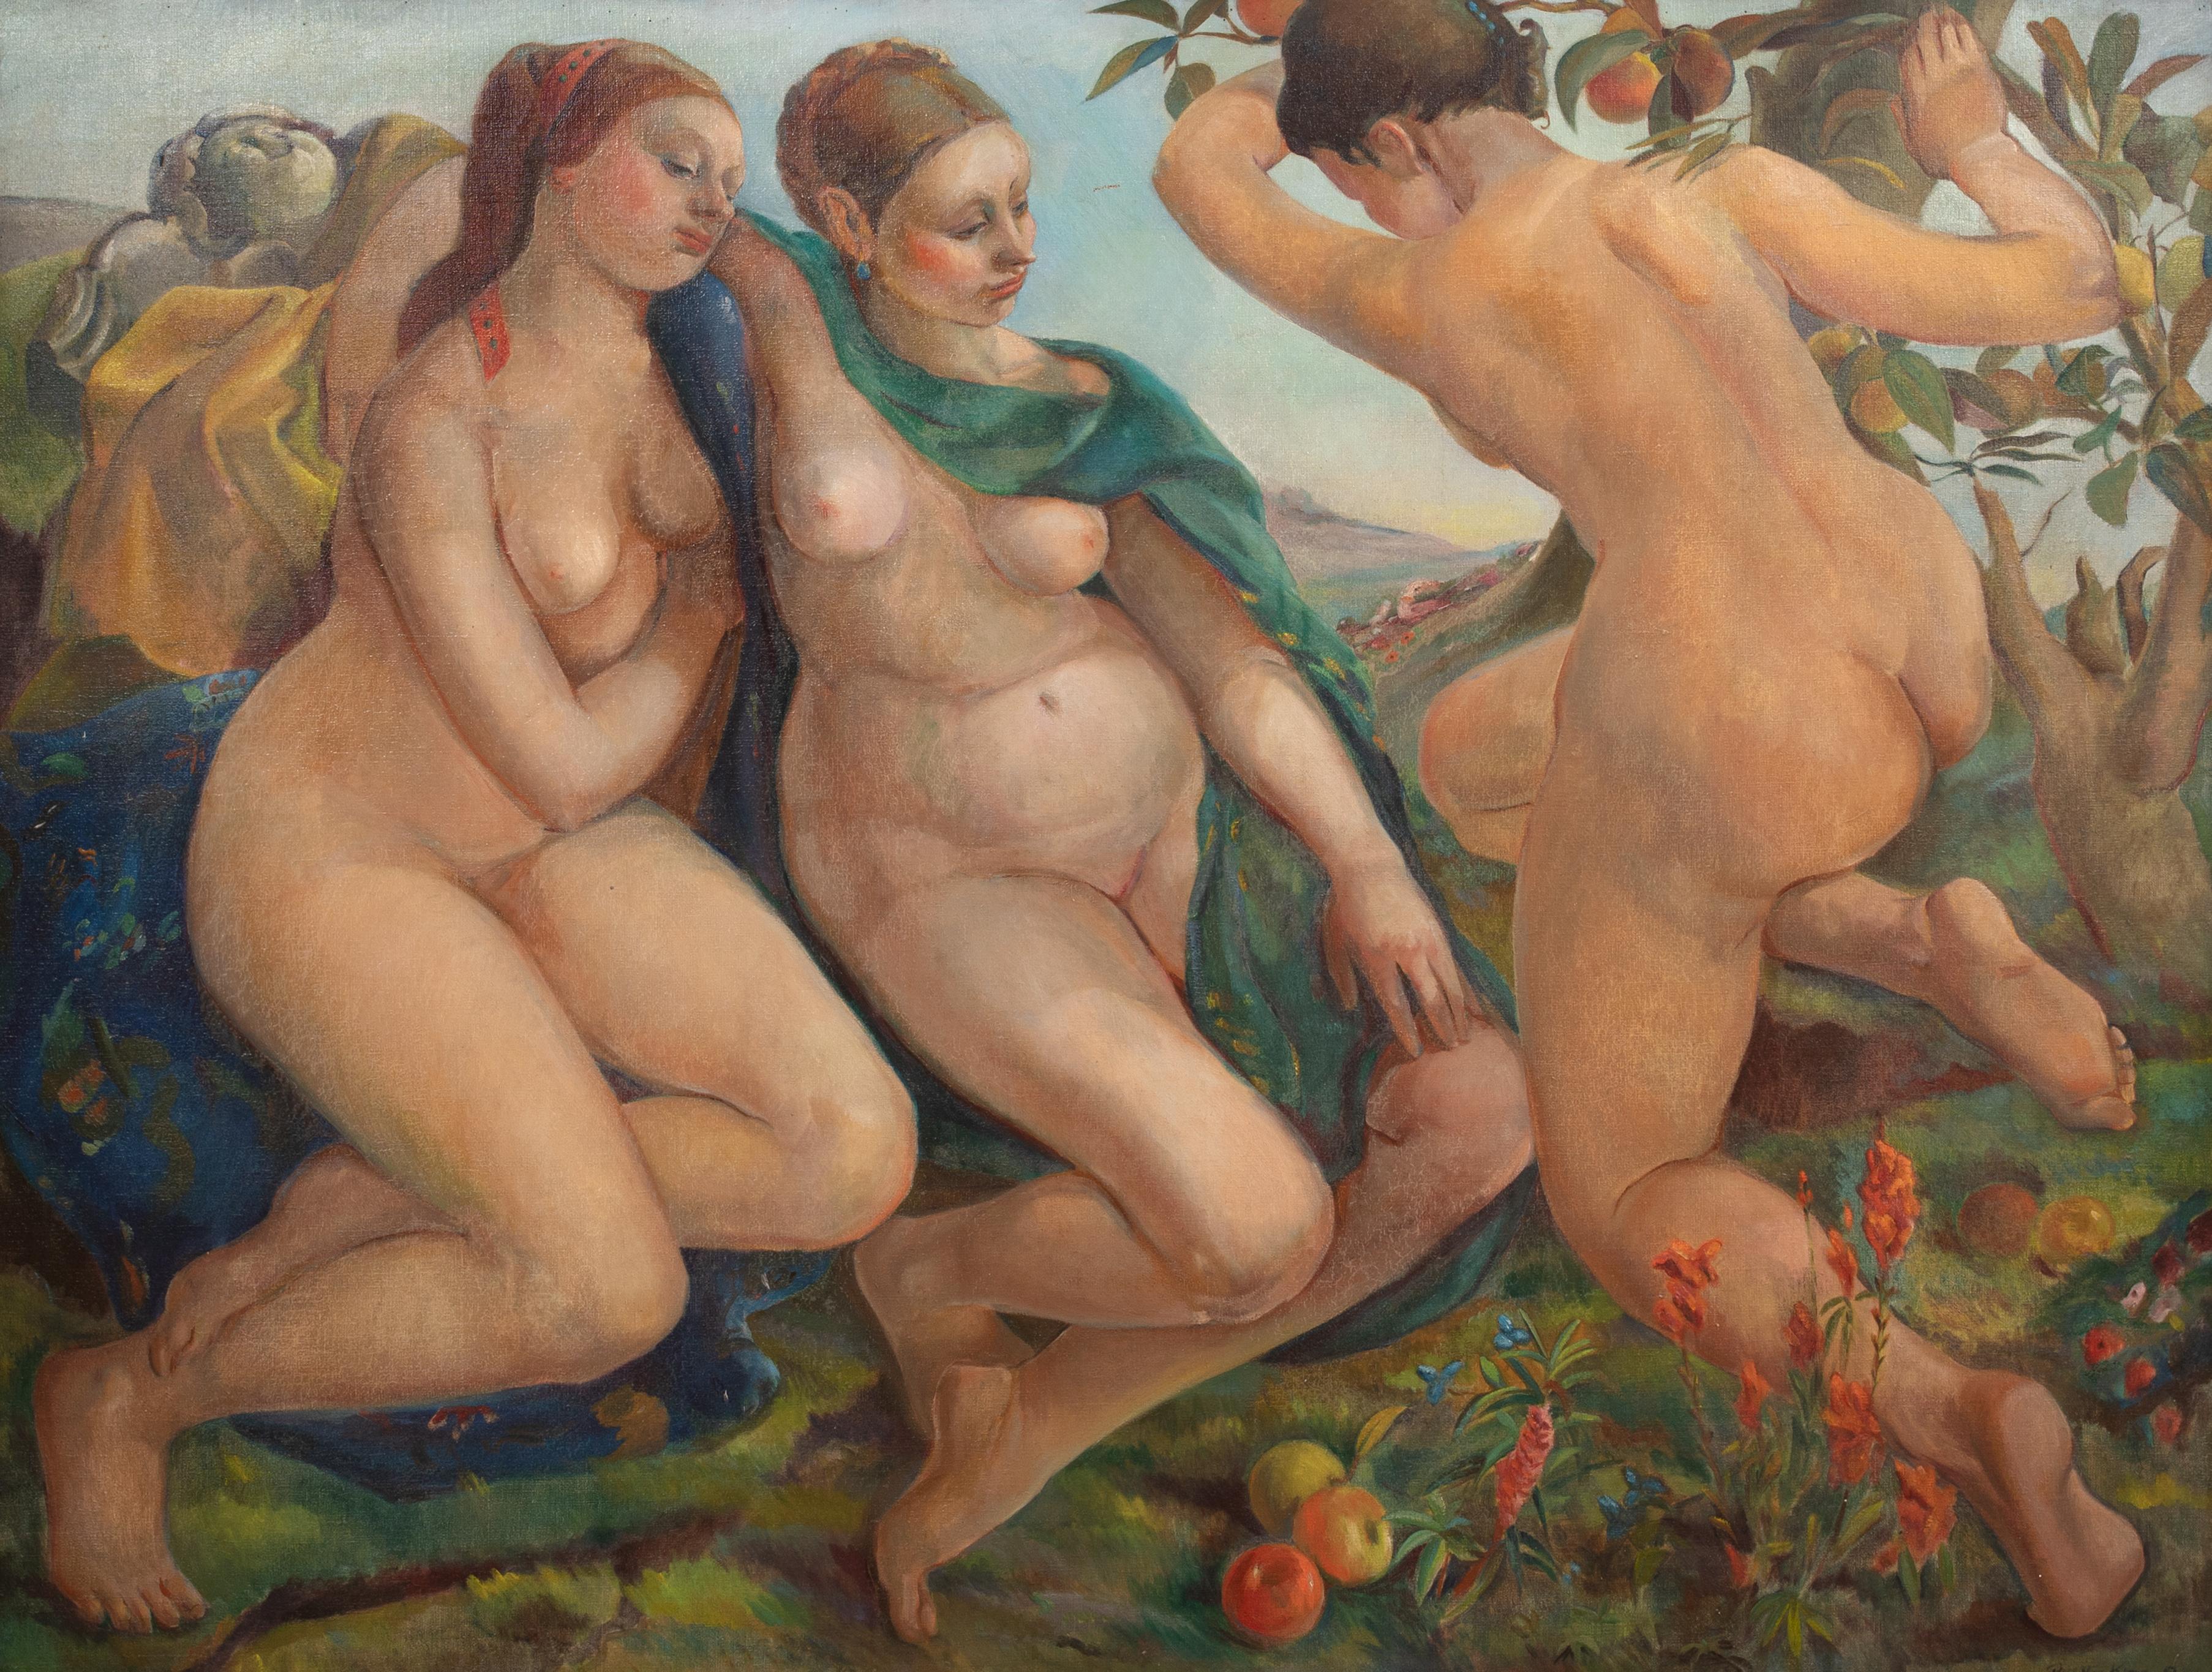 The Three Graces, dated 1957

by Dorothy KING RBA (1907-1990)

Large 20th Century depiction of the Three Graces nude by an apple tree, oil on canvas by Dorothy King. Superb post impressionist nude figural classical scene in excellent condition